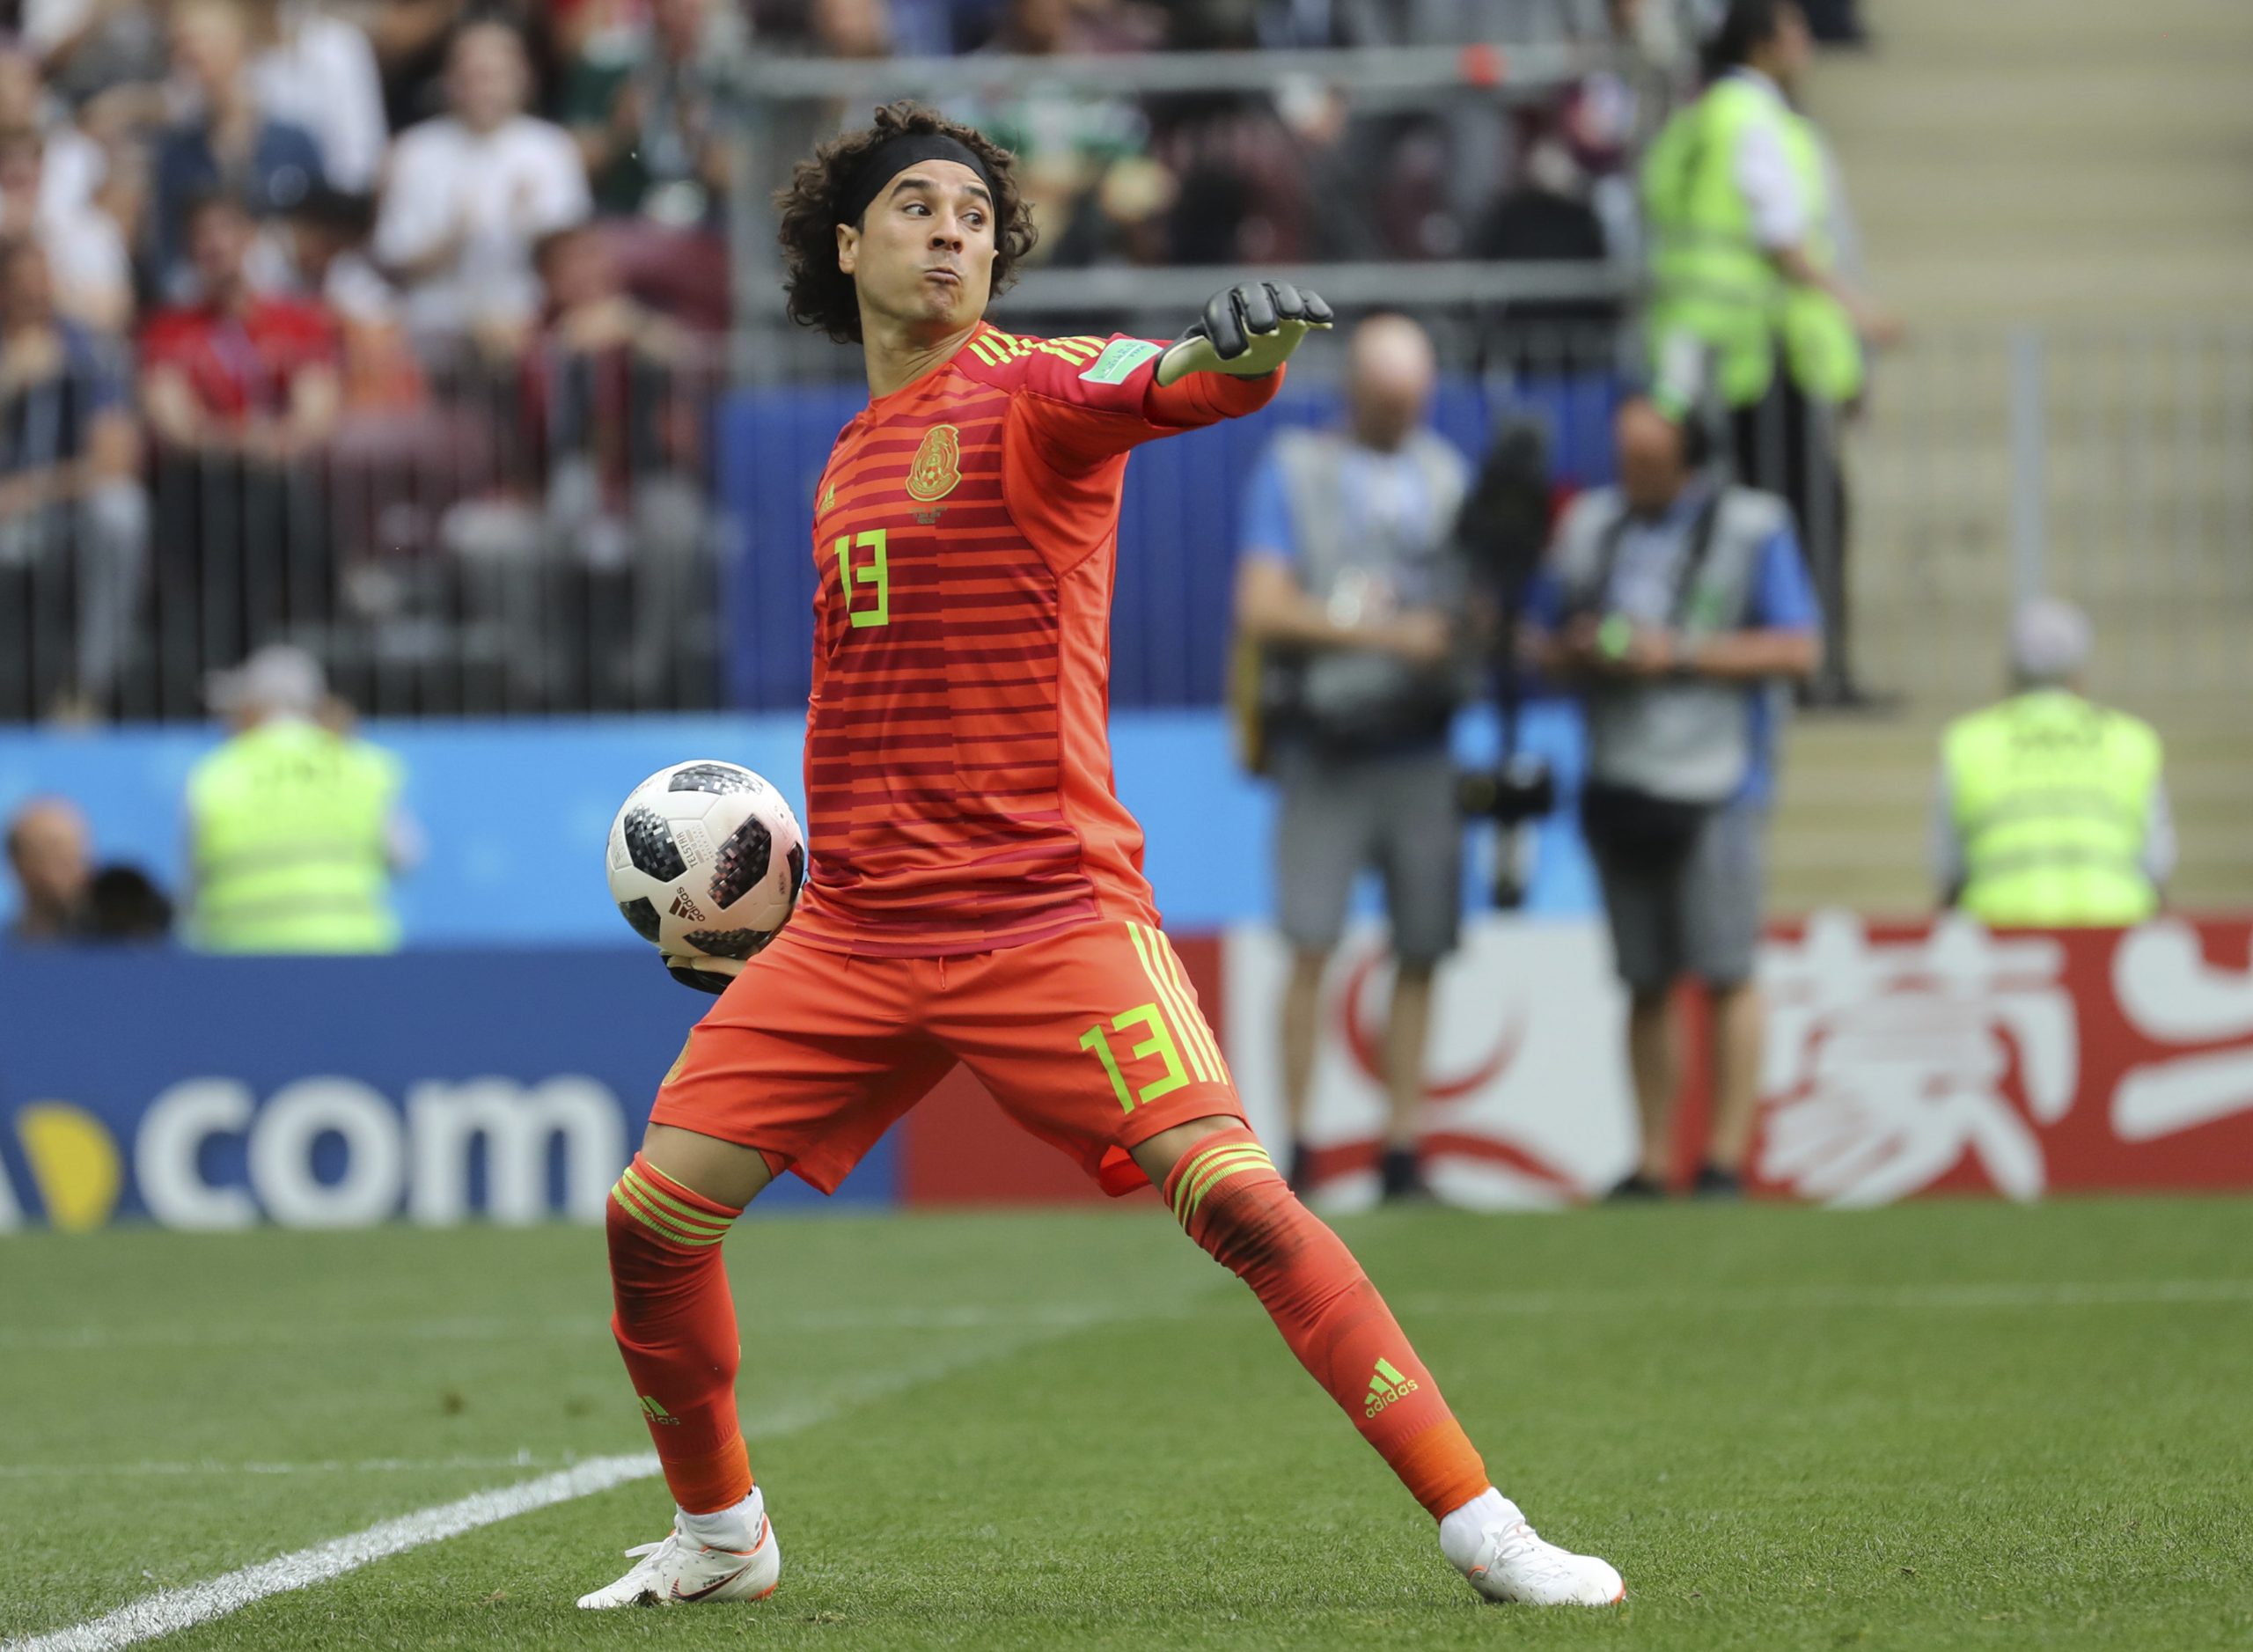 Mexican Goal Keeper Guillermo OCHOA throws a ball in the first half during the match of the first stage group F in FIFA World Cup Russia at Luzhniki Stadium in Moscow, Russia on June 17, 2018. ( The Yomiuri Shimbun via AP Images )